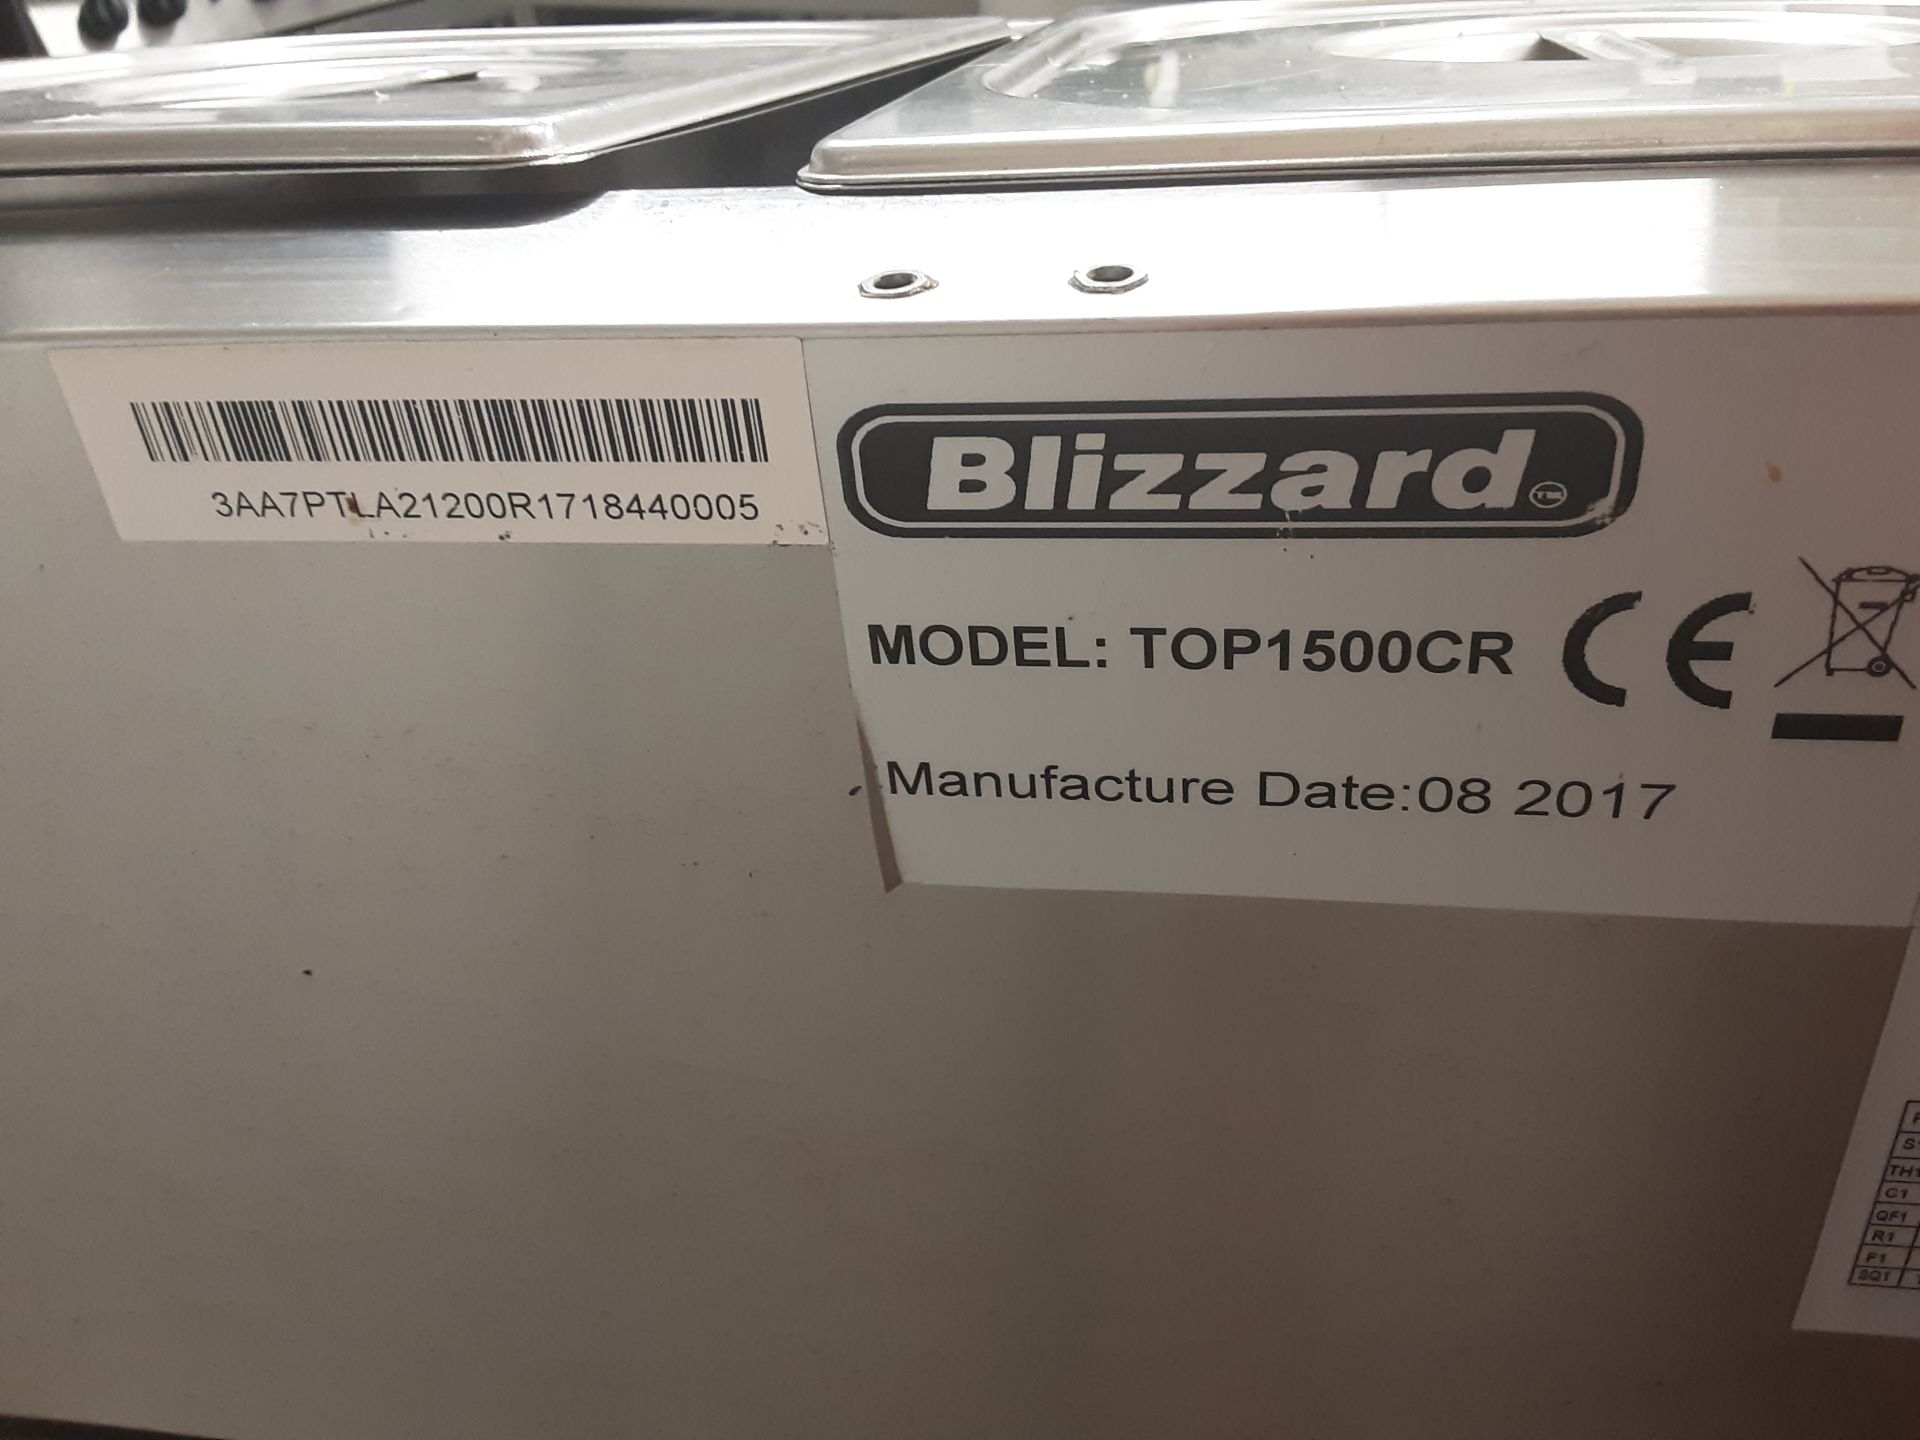 Blizzard TOP1500CR Refrigerated Topping Unit Serial No 3AA7PTLA21200R1718440005 Manufactured 08/ - Image 4 of 4